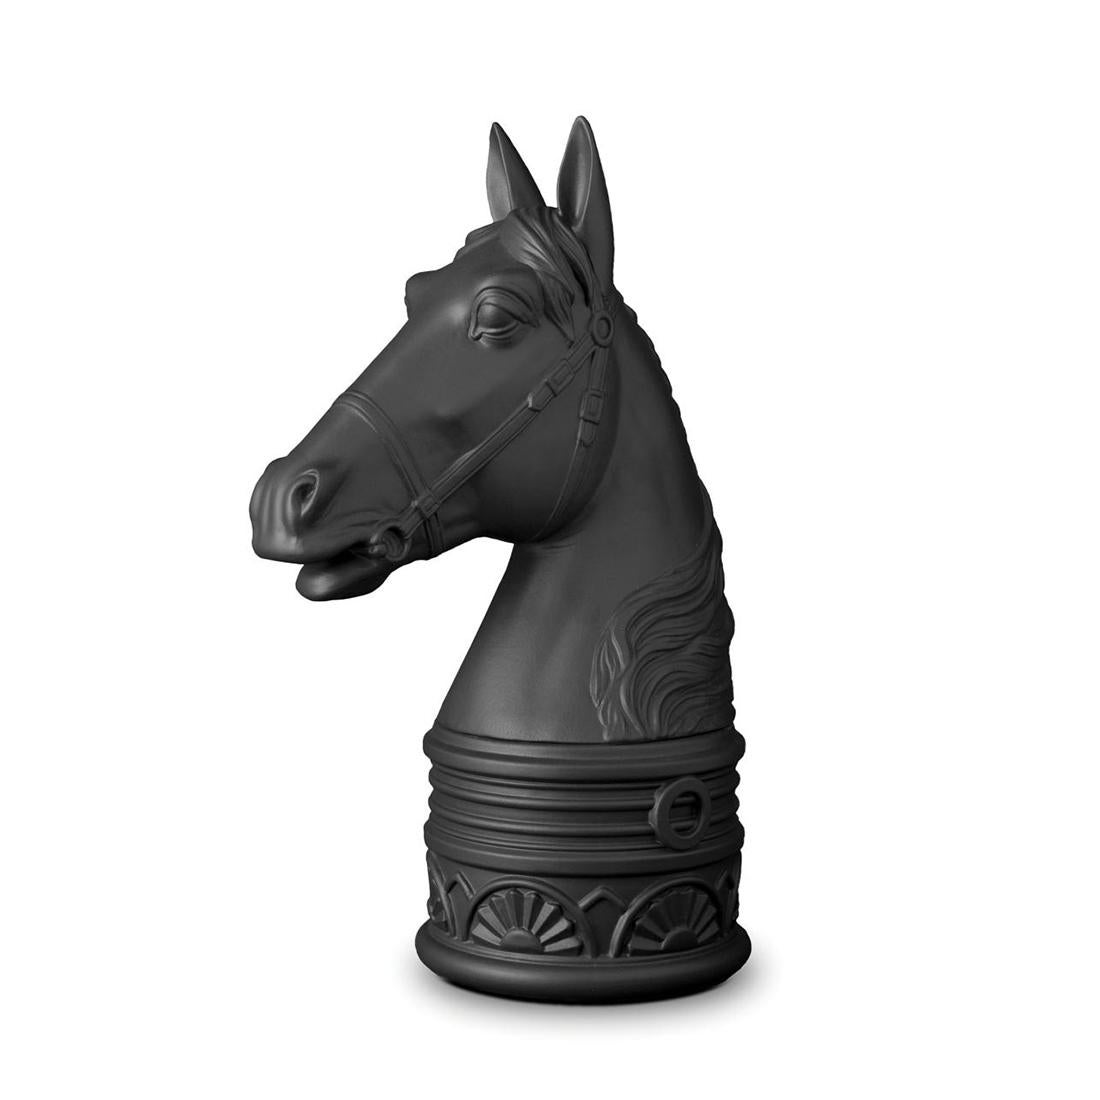 Bookends Gallop set of 2 in porcelain in black finish.
Also available in white finish on request.